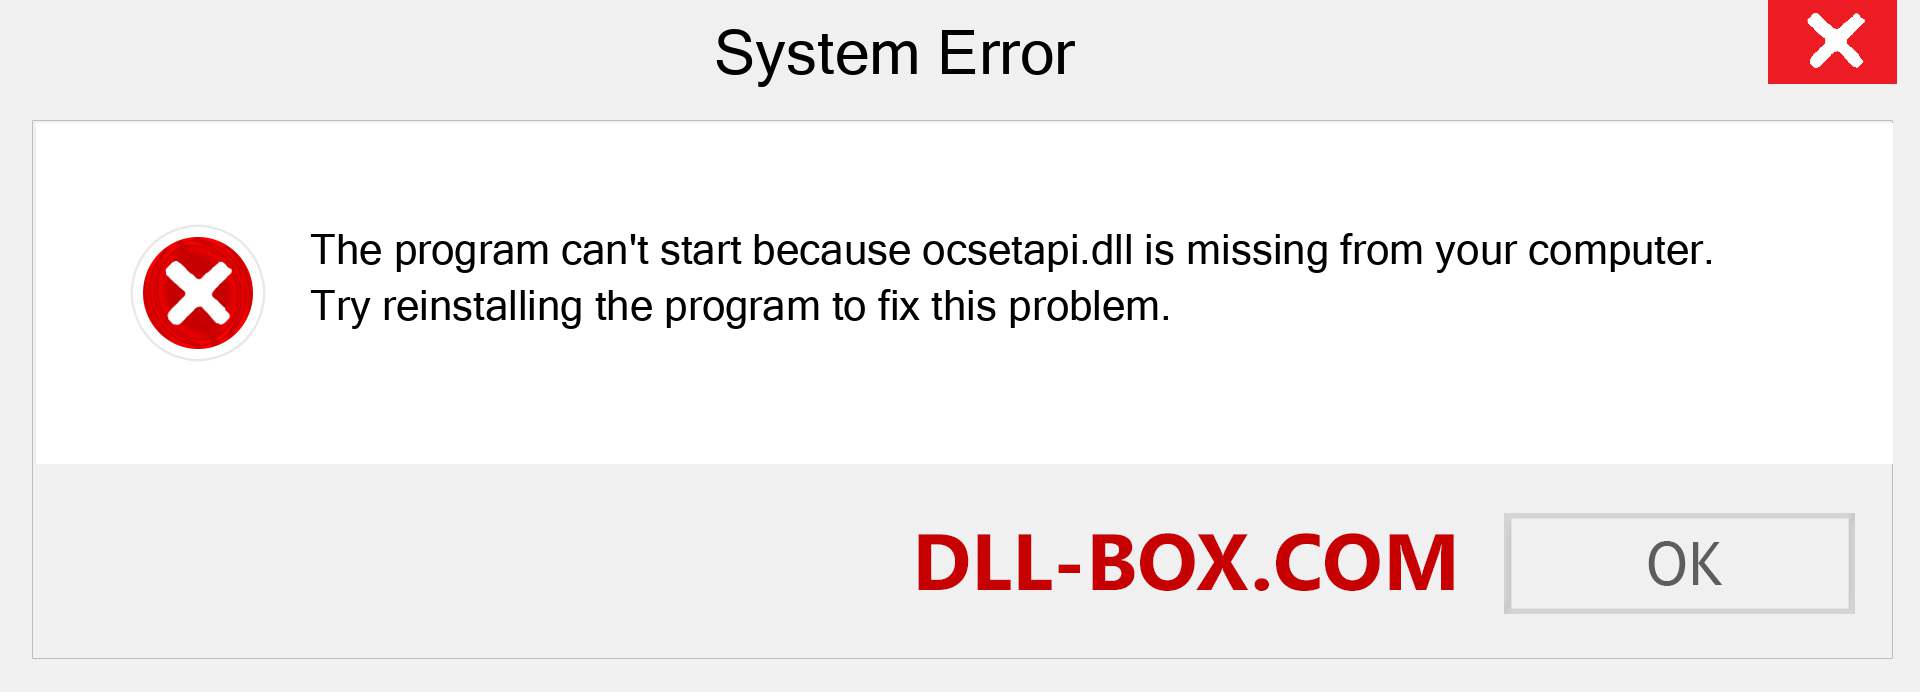  ocsetapi.dll file is missing?. Download for Windows 7, 8, 10 - Fix  ocsetapi dll Missing Error on Windows, photos, images